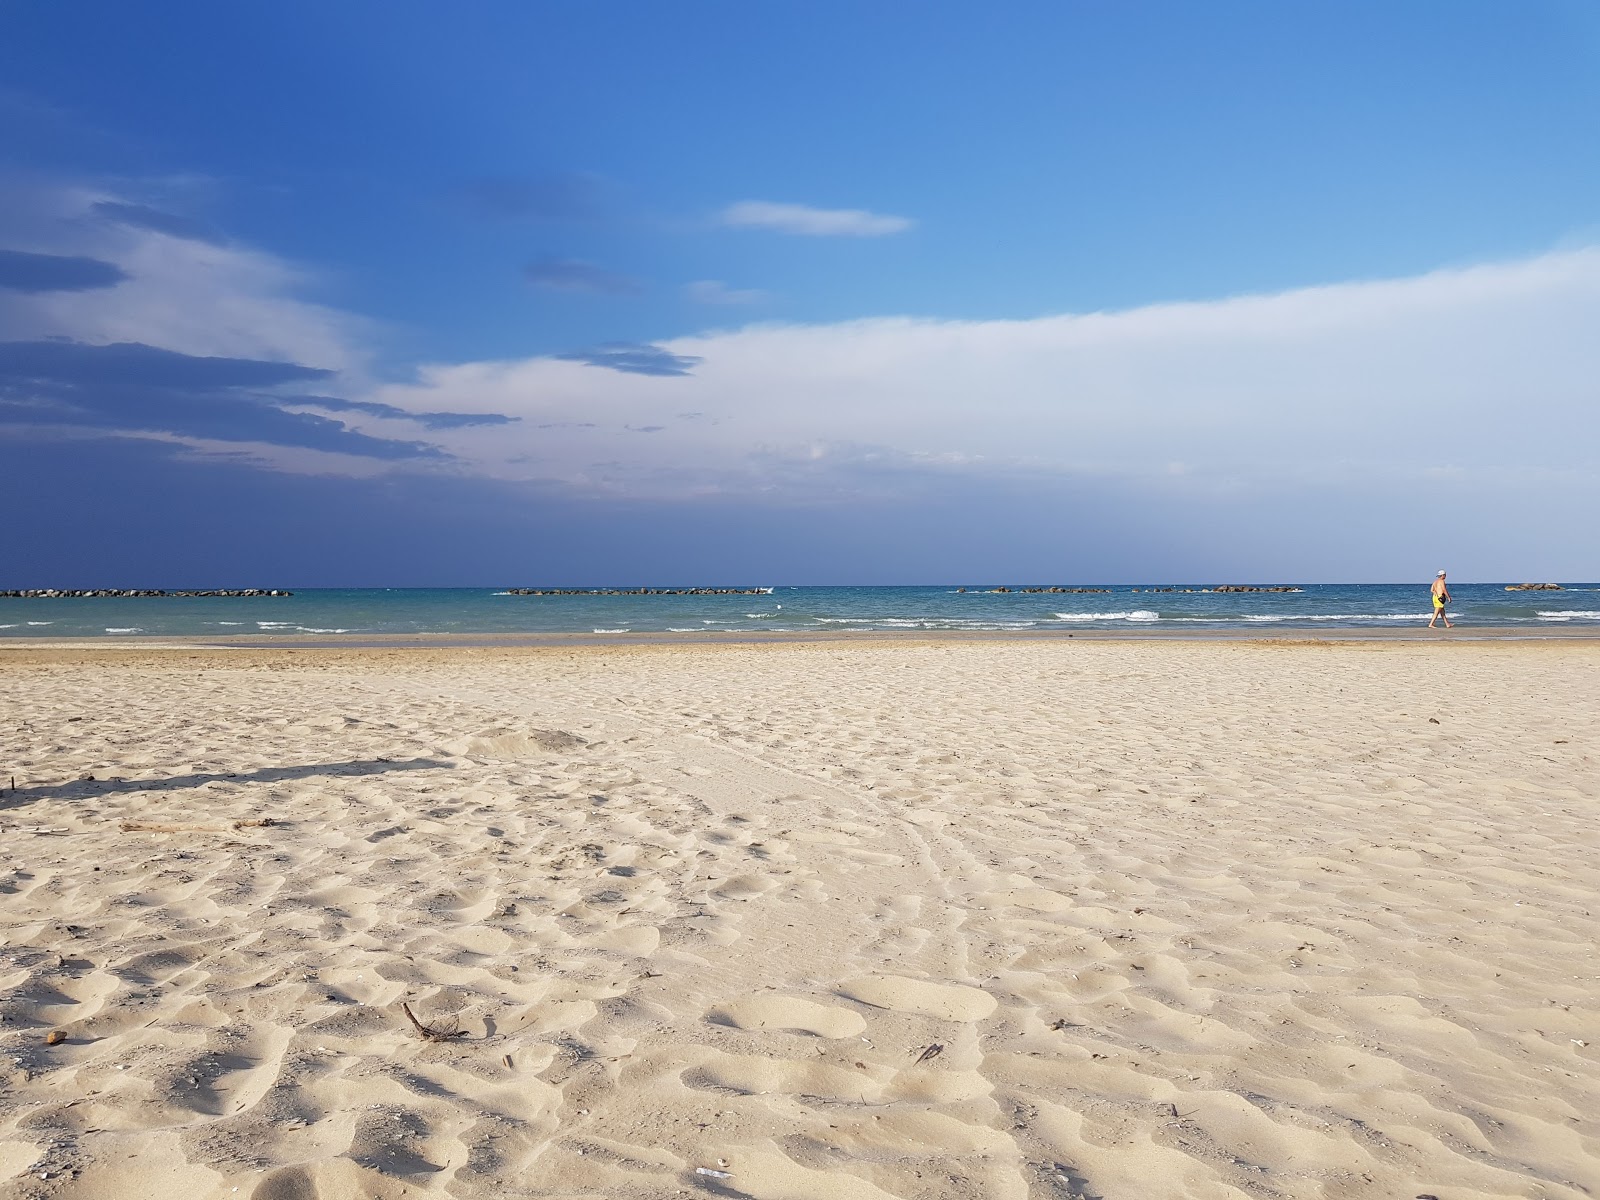 Photo of Senigallia beach - popular place among relax connoisseurs